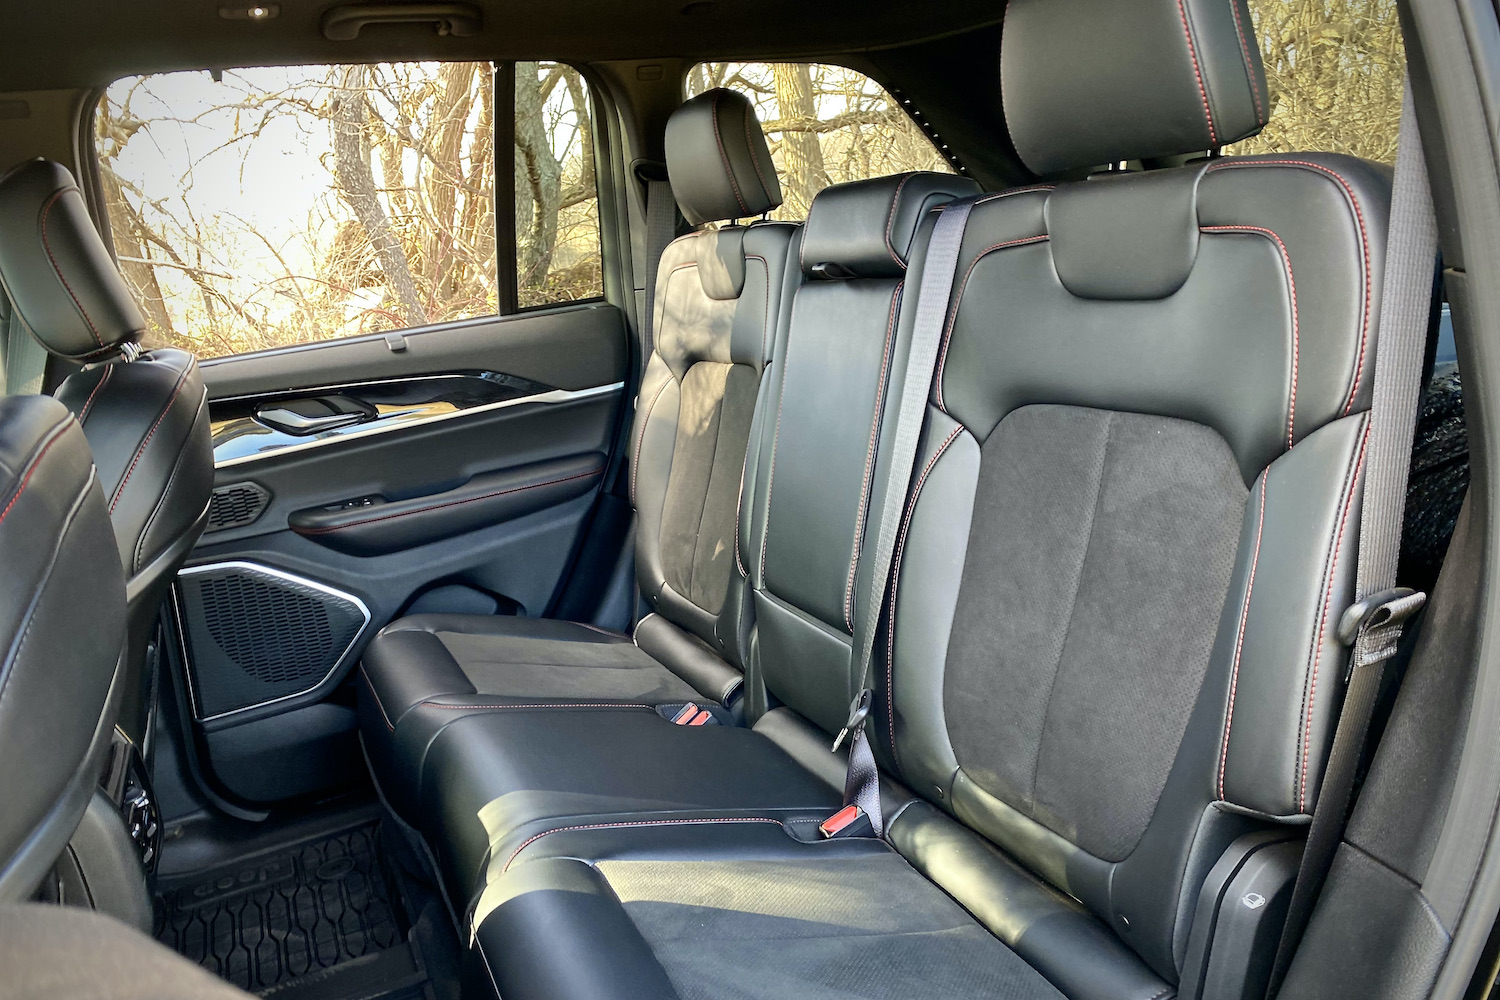 2022 Jeep Grand Cherokee Trailhawk rear seats from the driver's side.